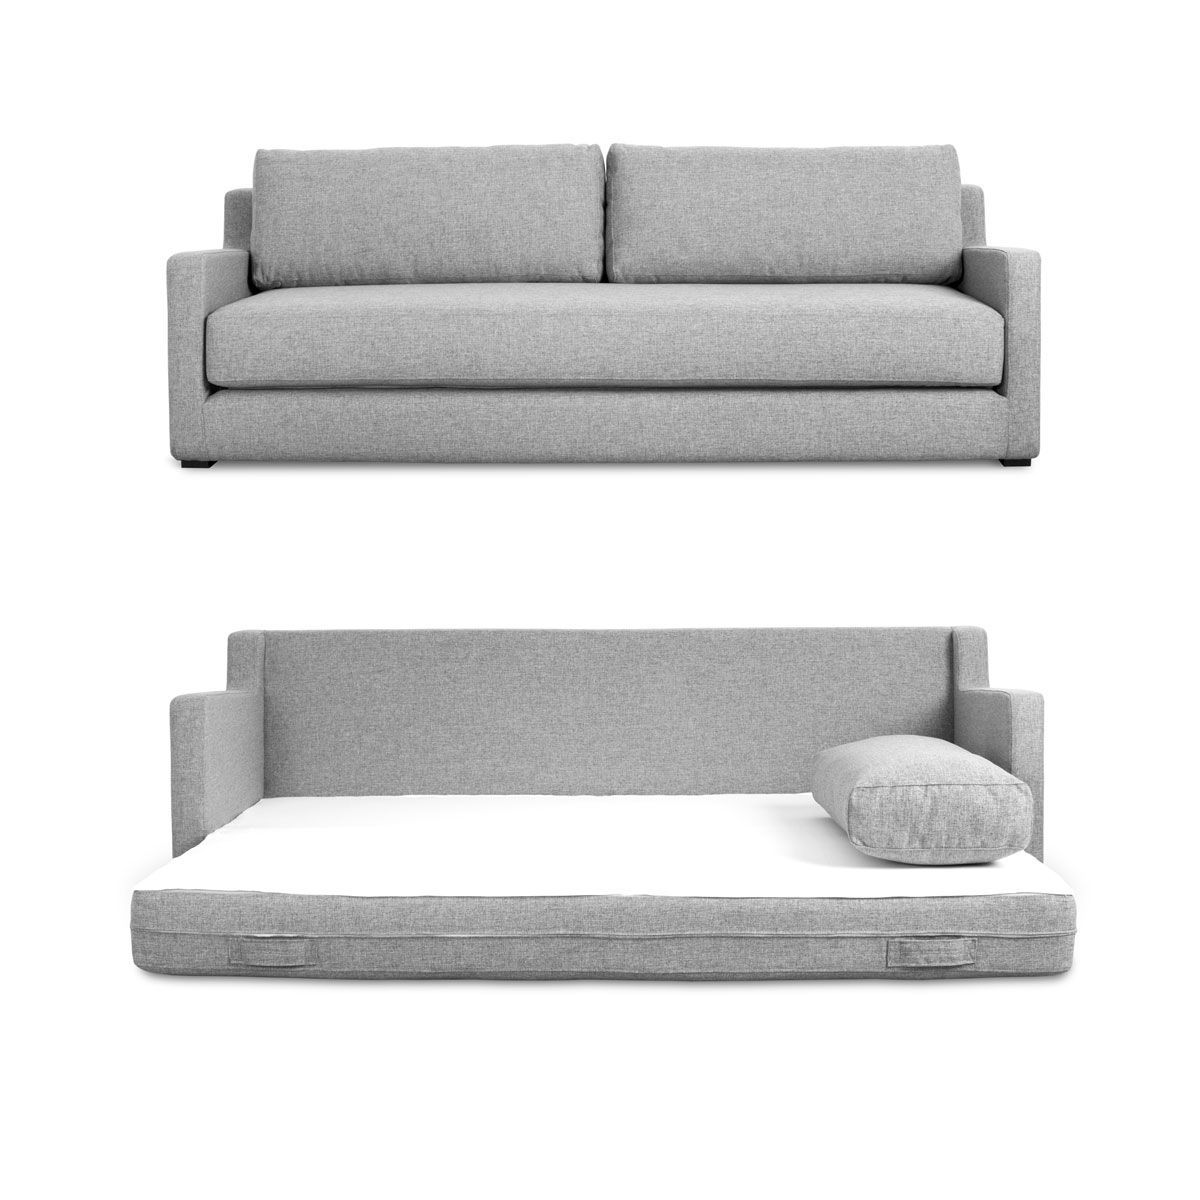 Newest Queen Size Convertible Sofa Bed – Ideas On Foter Inside Queen Size Convertible Sofa Beds (Photo 4 of 15)